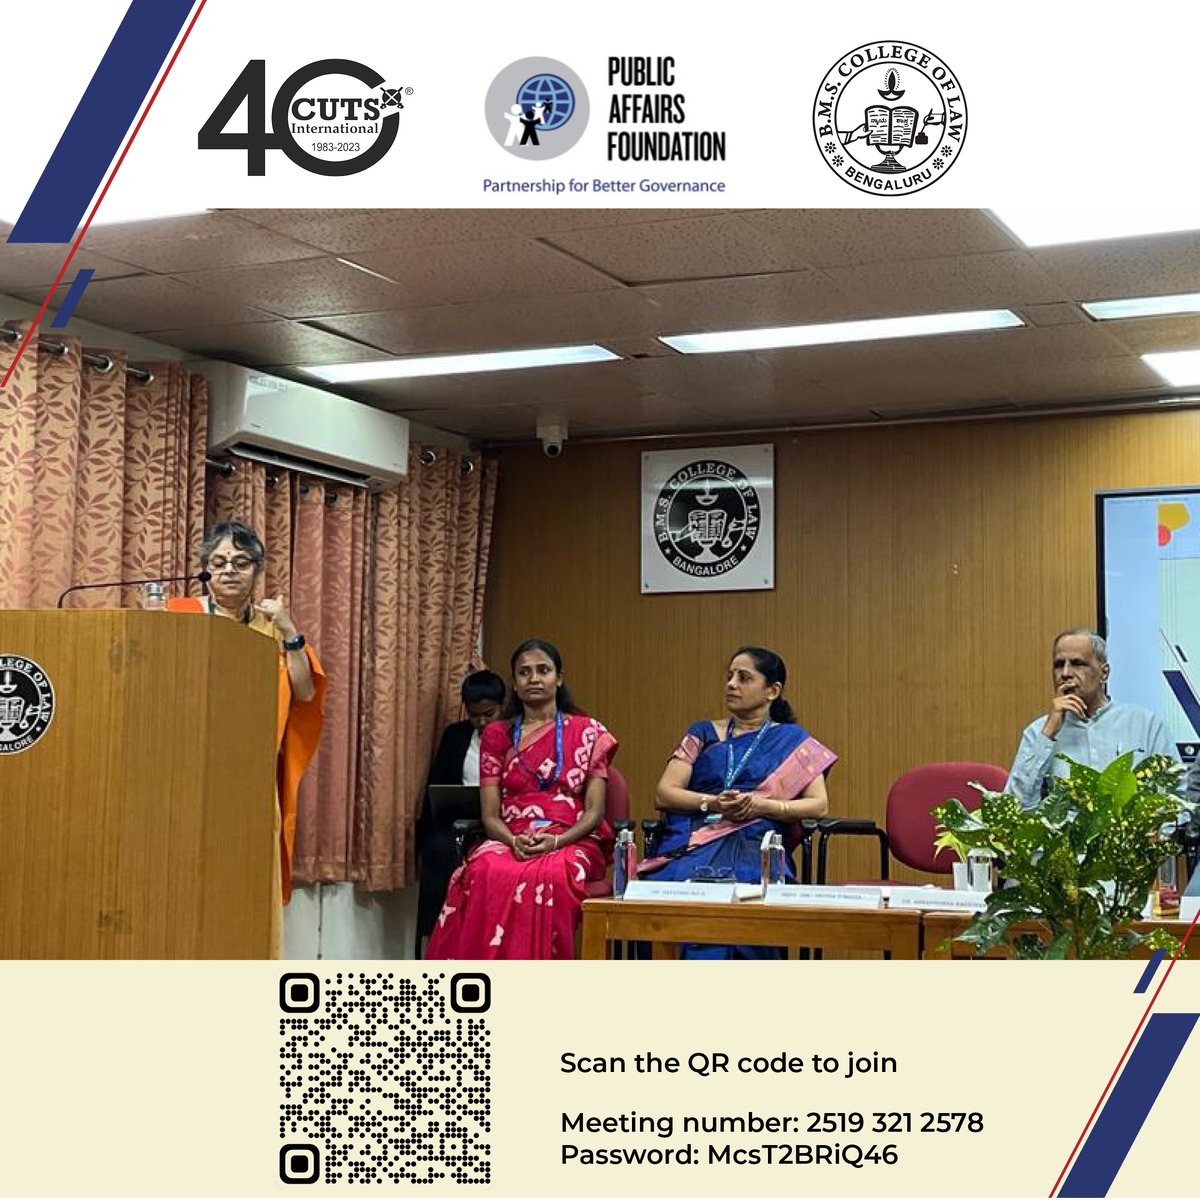 Dr Annapoorna Ravi, Director, PAF, setting the context for the importance of FoPL in Addressing NCDs

@annaravi 
@onthinktanks
@cutsint
@pacindia
@MoHFW_INDIA
@pafglobal